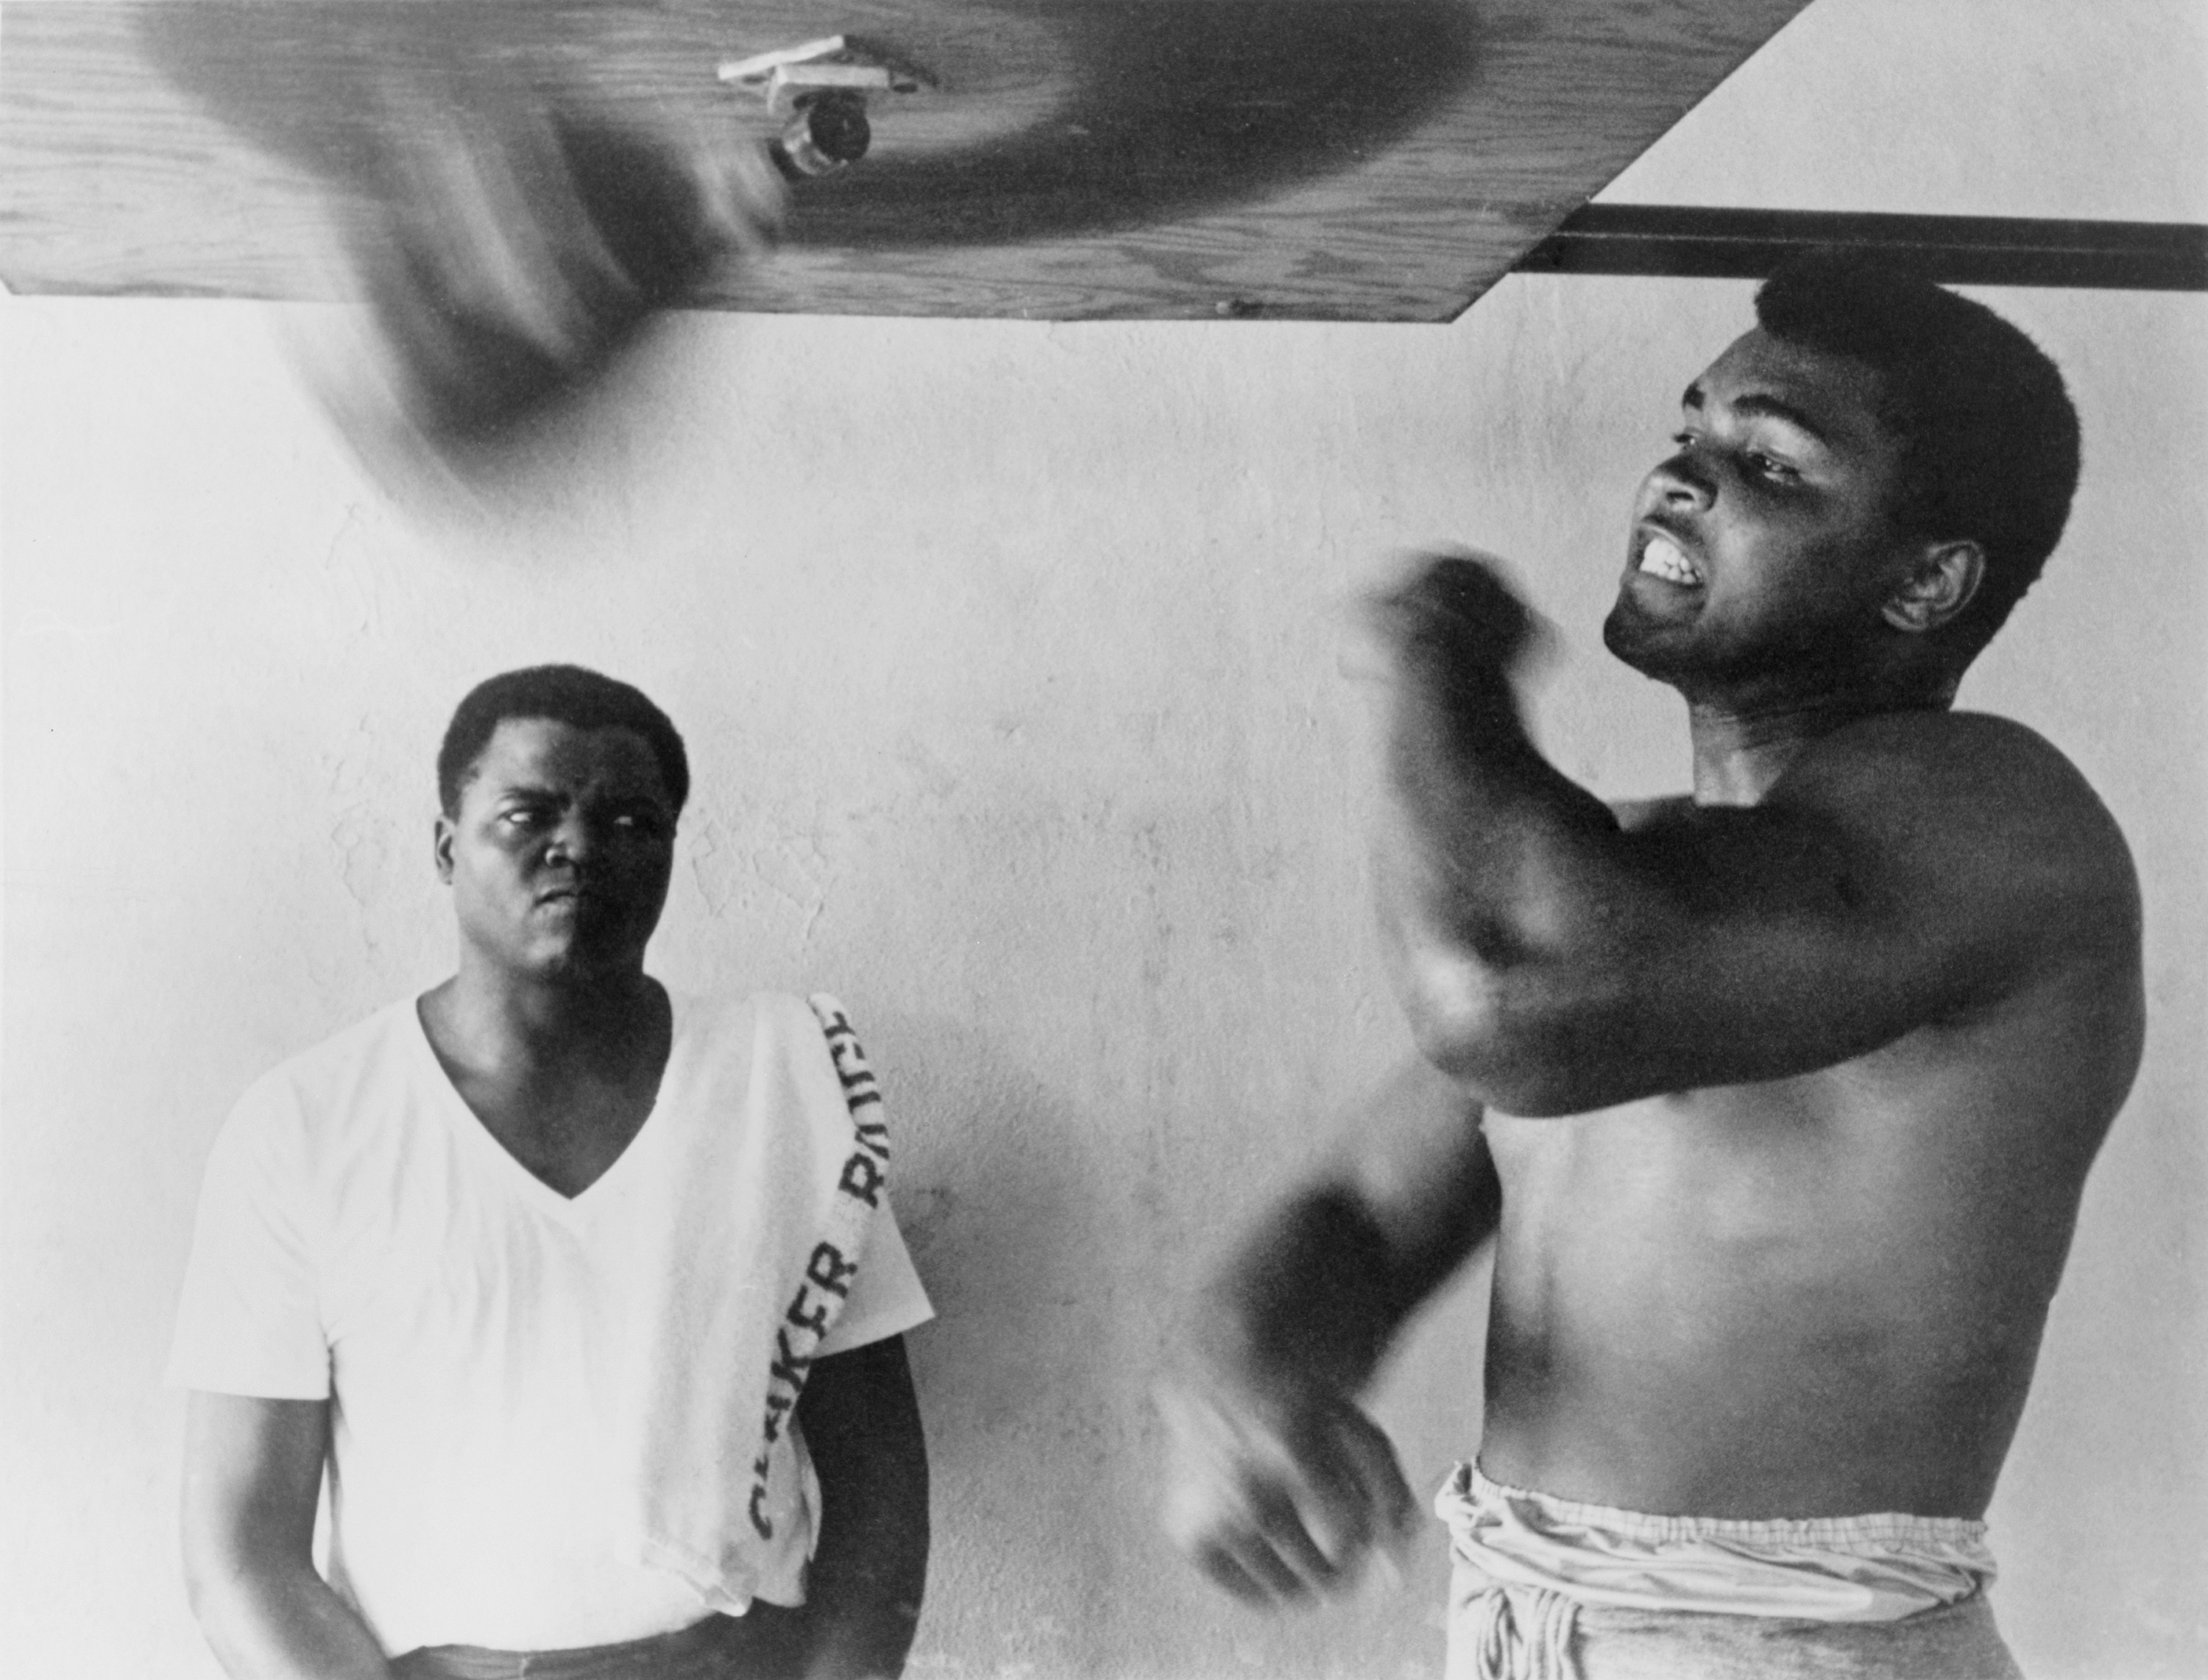 Muhammad Ali, works out on light bag in Miami, Florida. 1965., Image: 101845325, License: Rights-managed, Restrictions: For usage credit please use; Courtesy Everett Collection, Model Release: no, Credit line: Profimedia, Everett